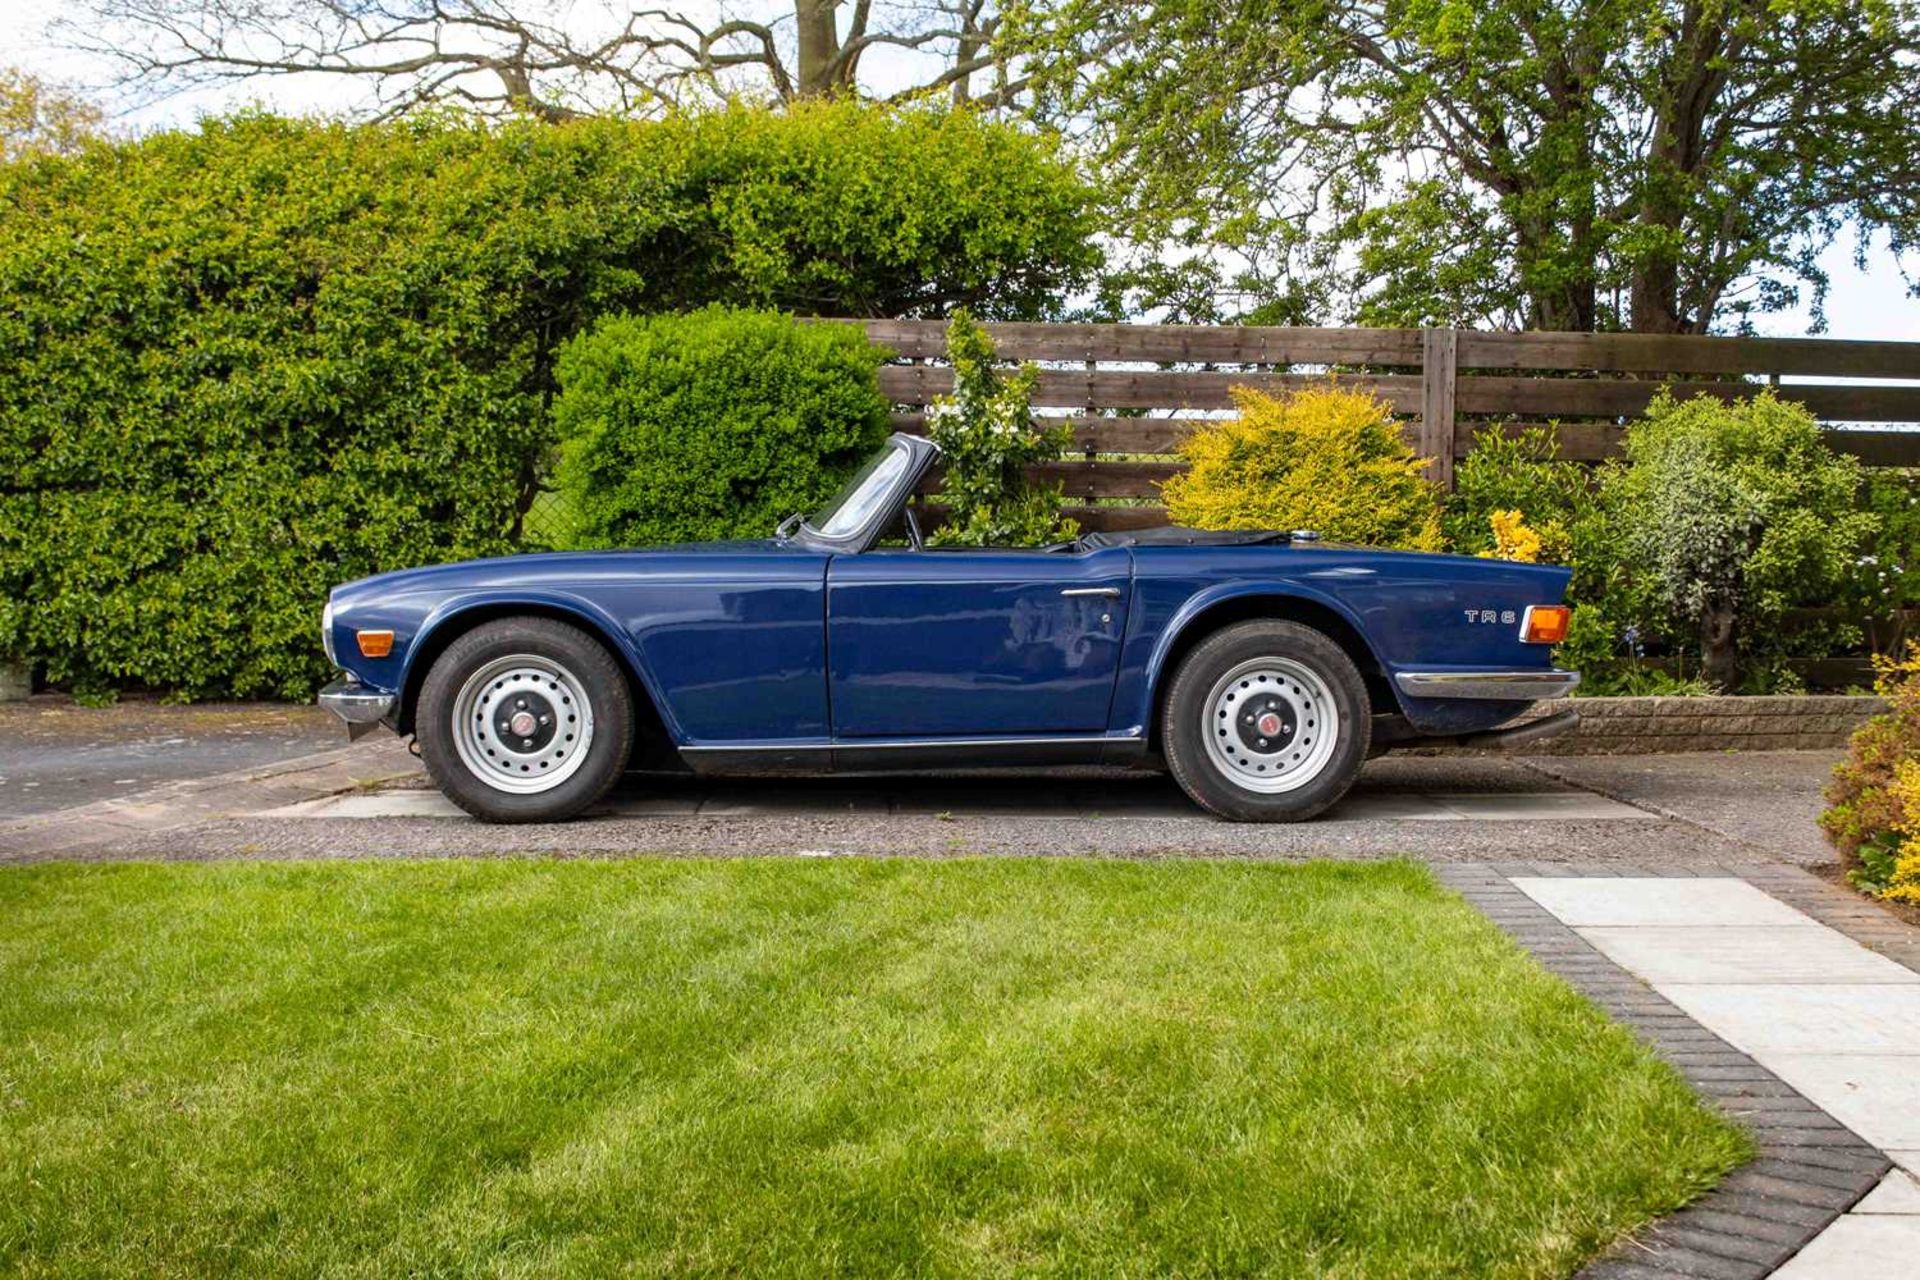 1972 Triumph TR6 Home market example, specified with manual overdrive transmission - Image 10 of 95